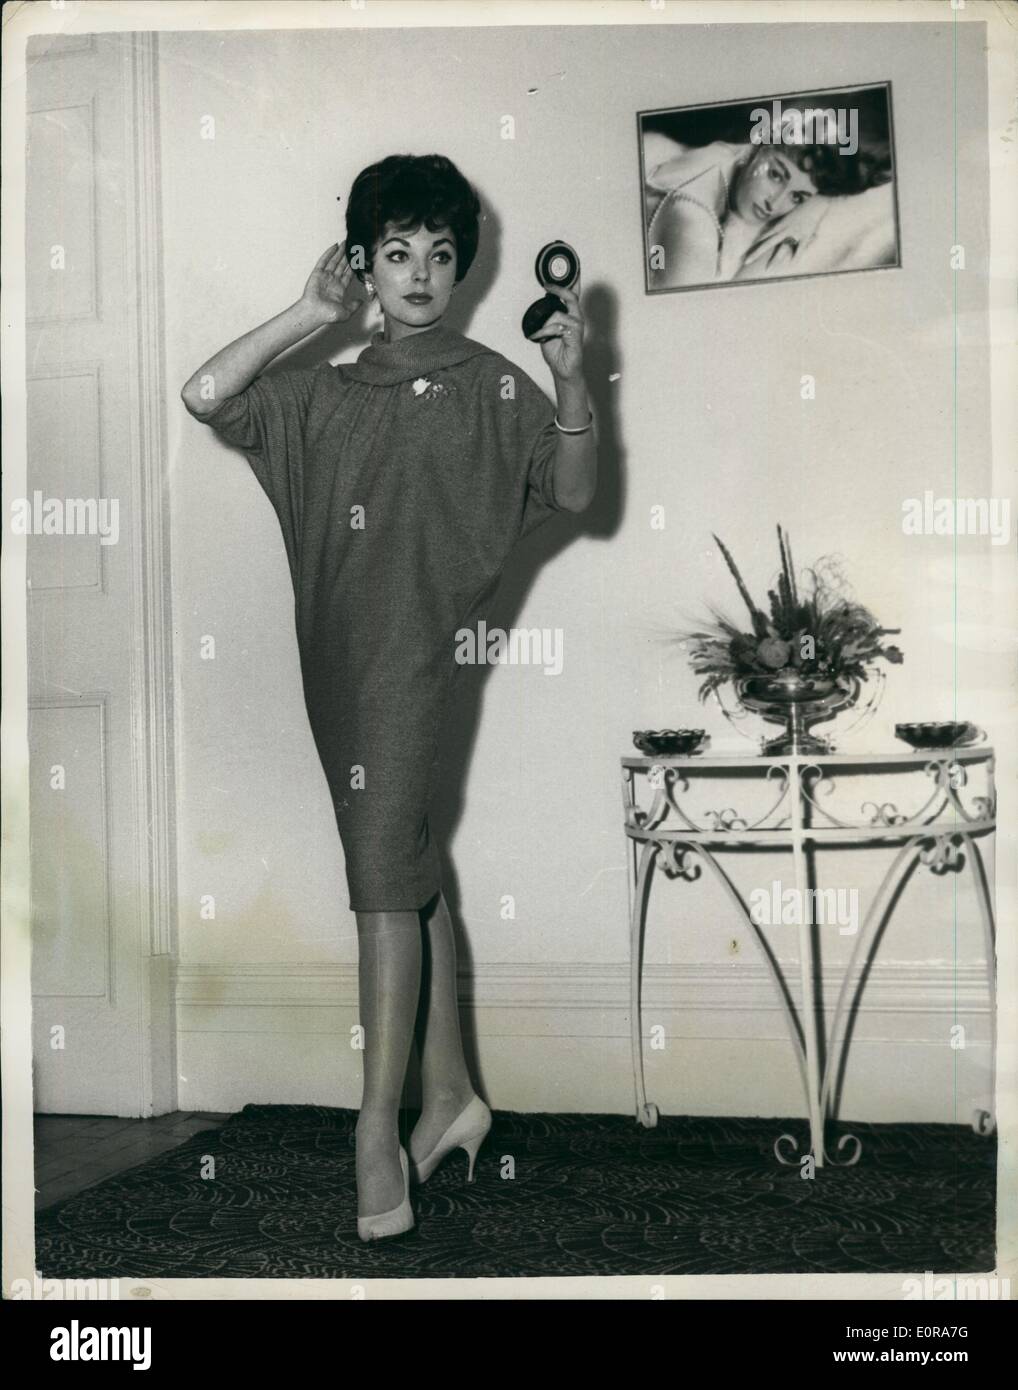 Nov. 11, 1958 - Joan Collins Flies To London. Photo shows British film star Joan Collins wears a red sack dress - in London night. She arrived a few hours earlier for a five day visit to her parents before returning to Hollywood. Stock Photo